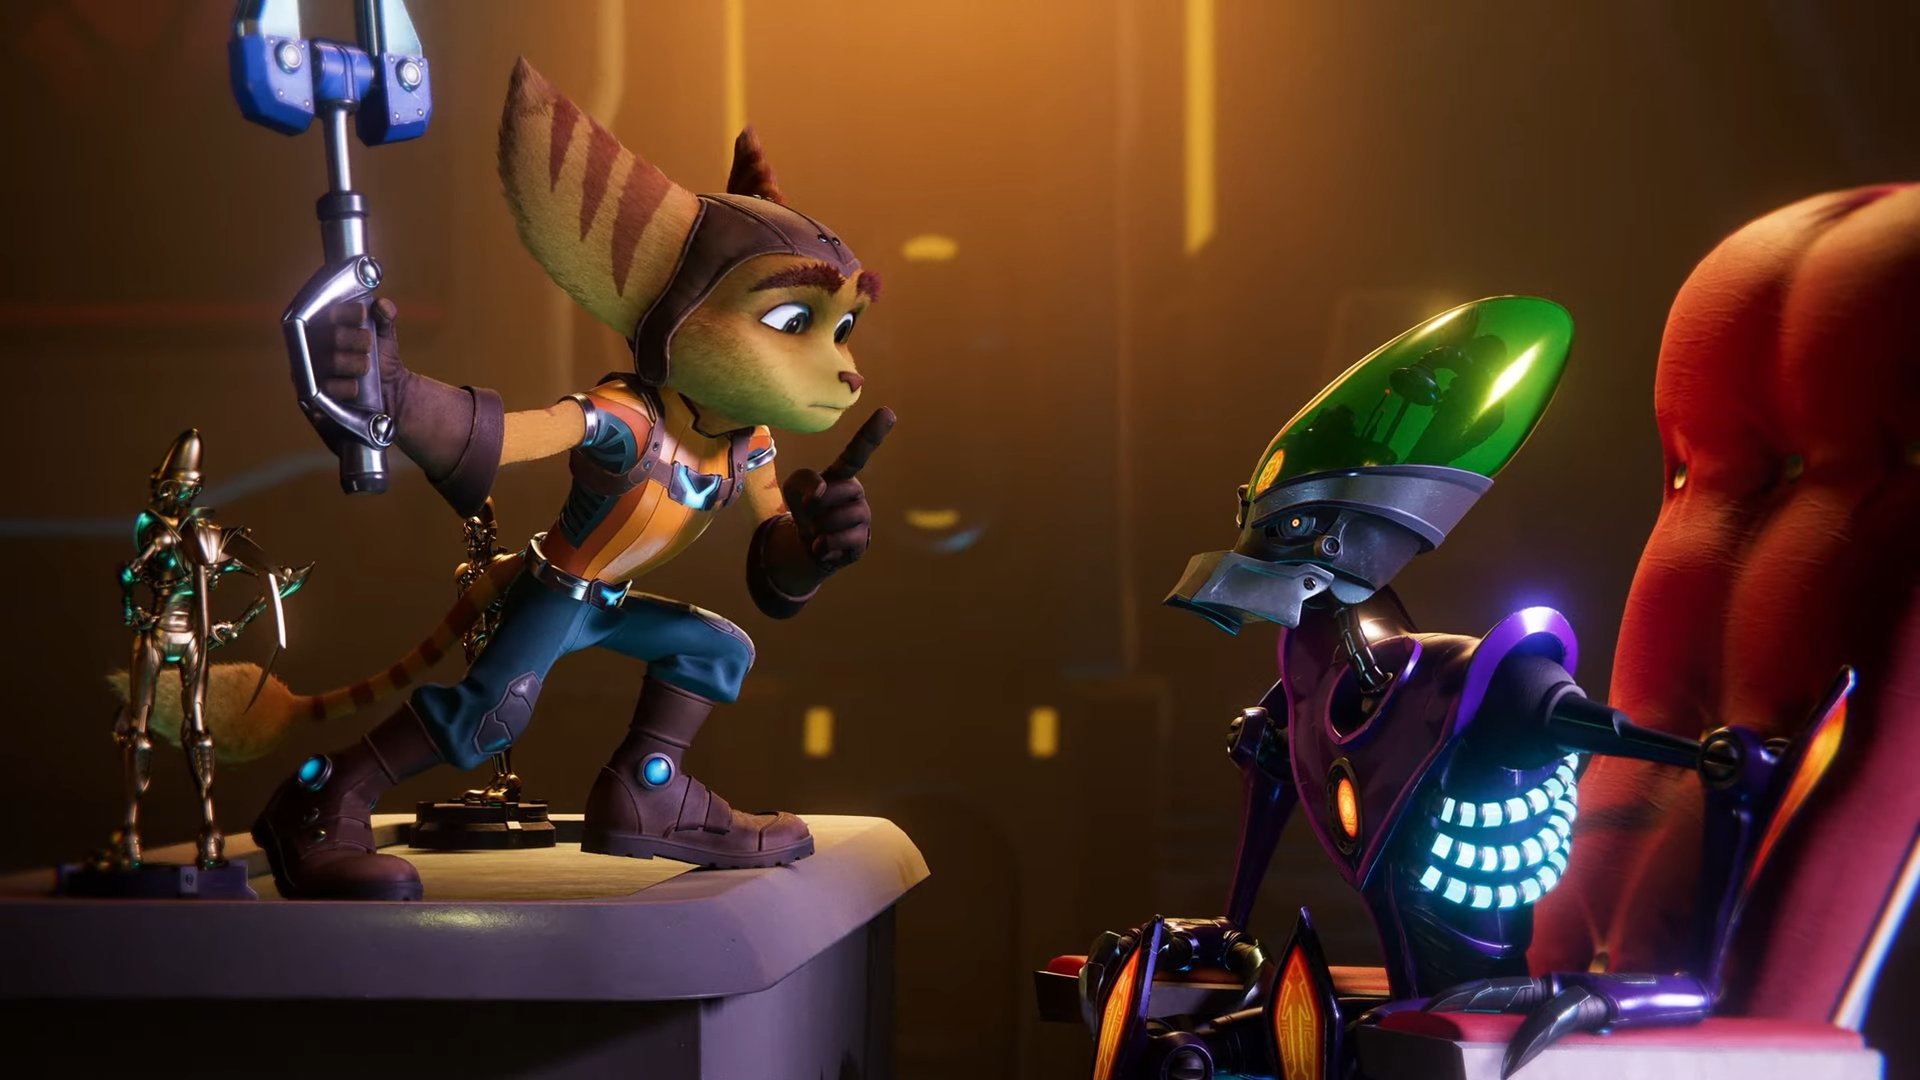 Meet Rivet The Mysterious New Protagonist In Ratchet And Clank Rift